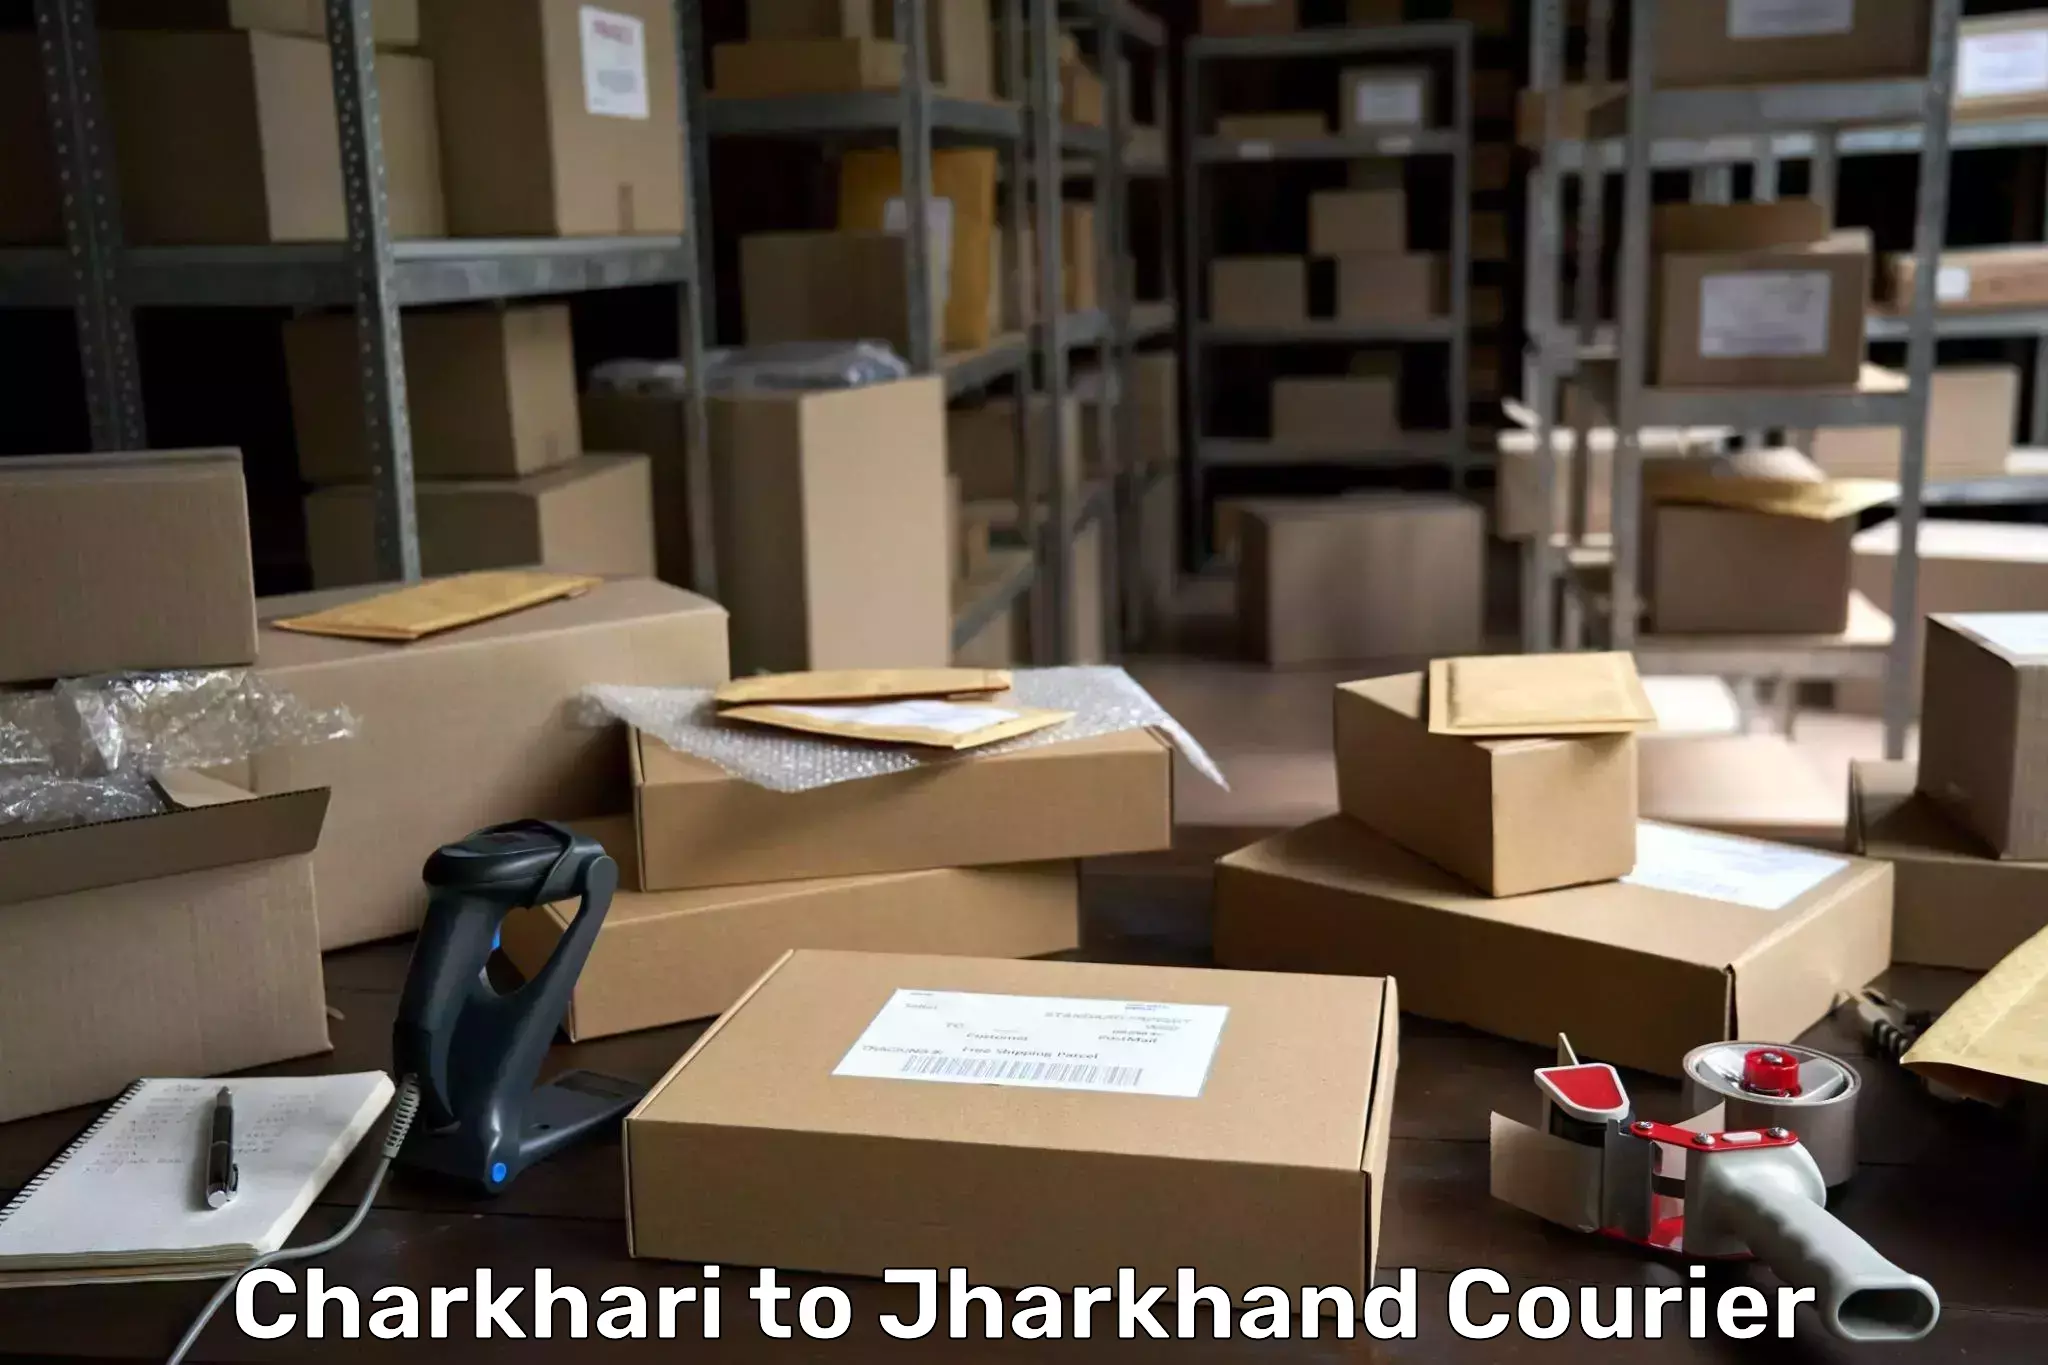 Easy access courier services in Charkhari to Lohardaga